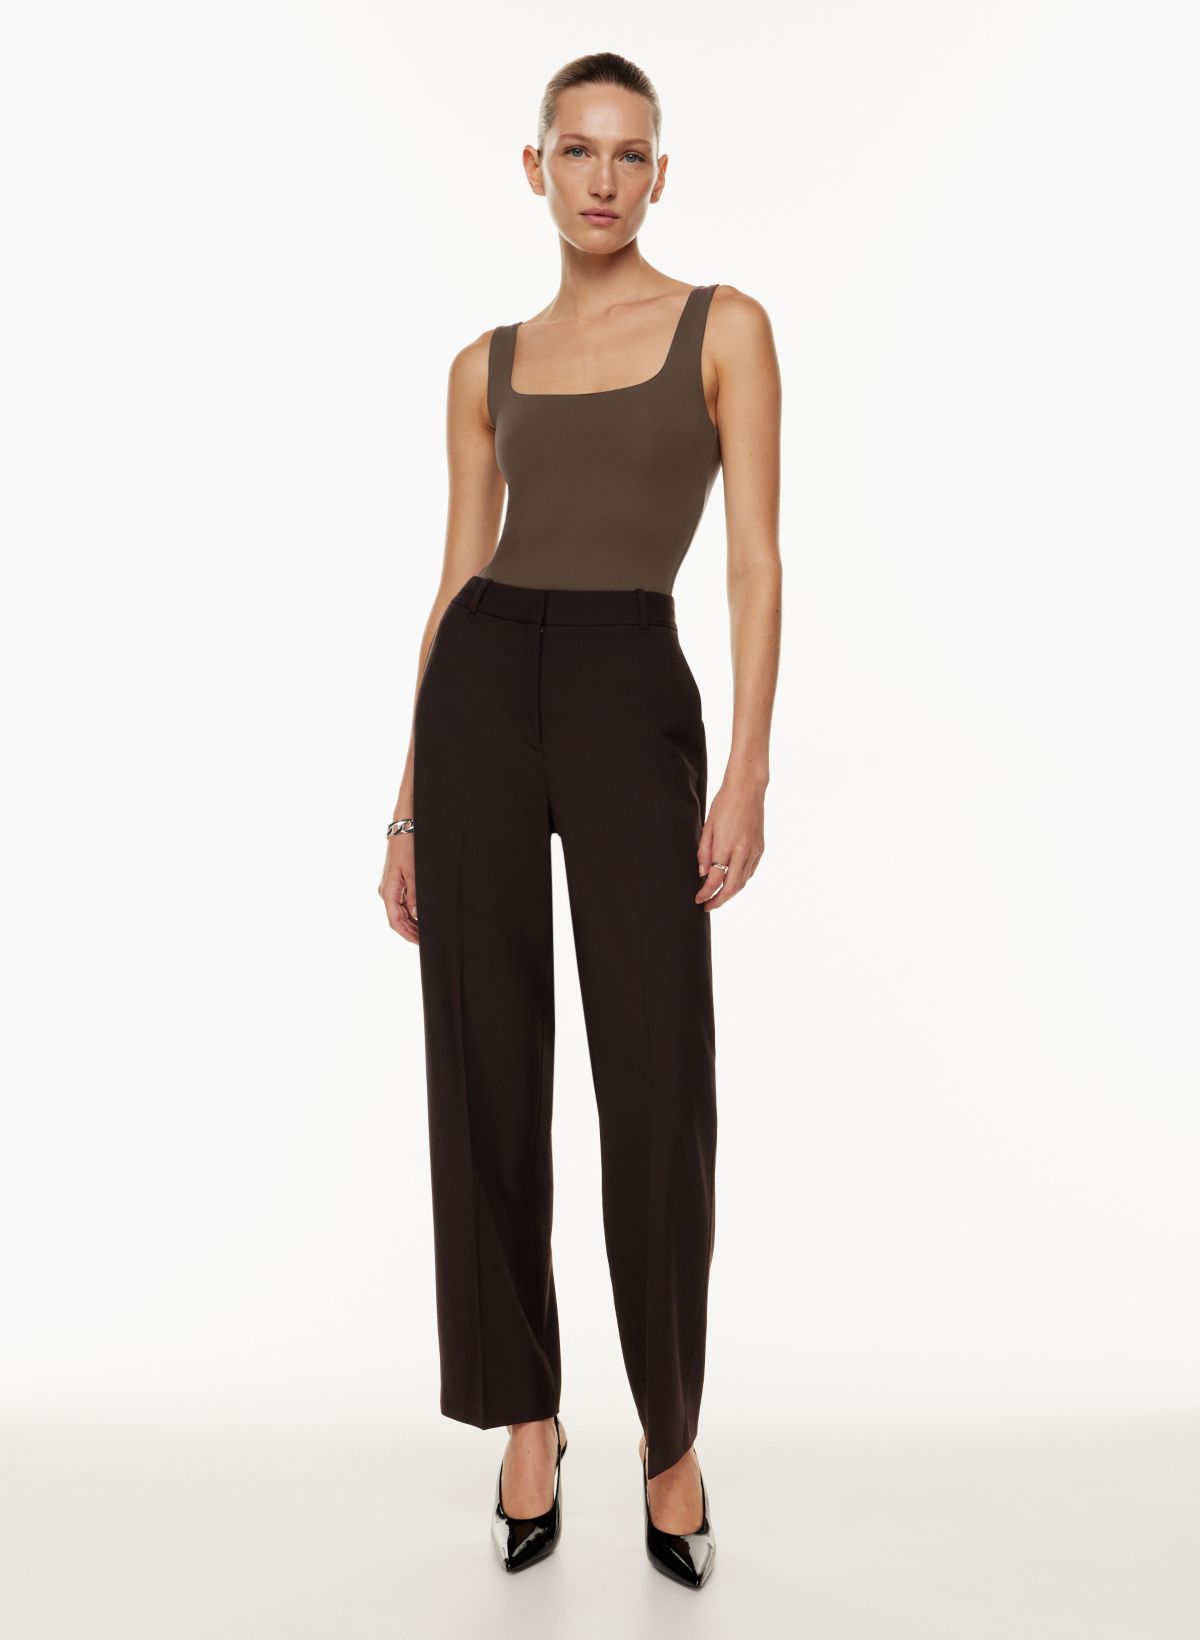 Aritzia Babaton Contour Body Suit Brown Size M - $67 New With